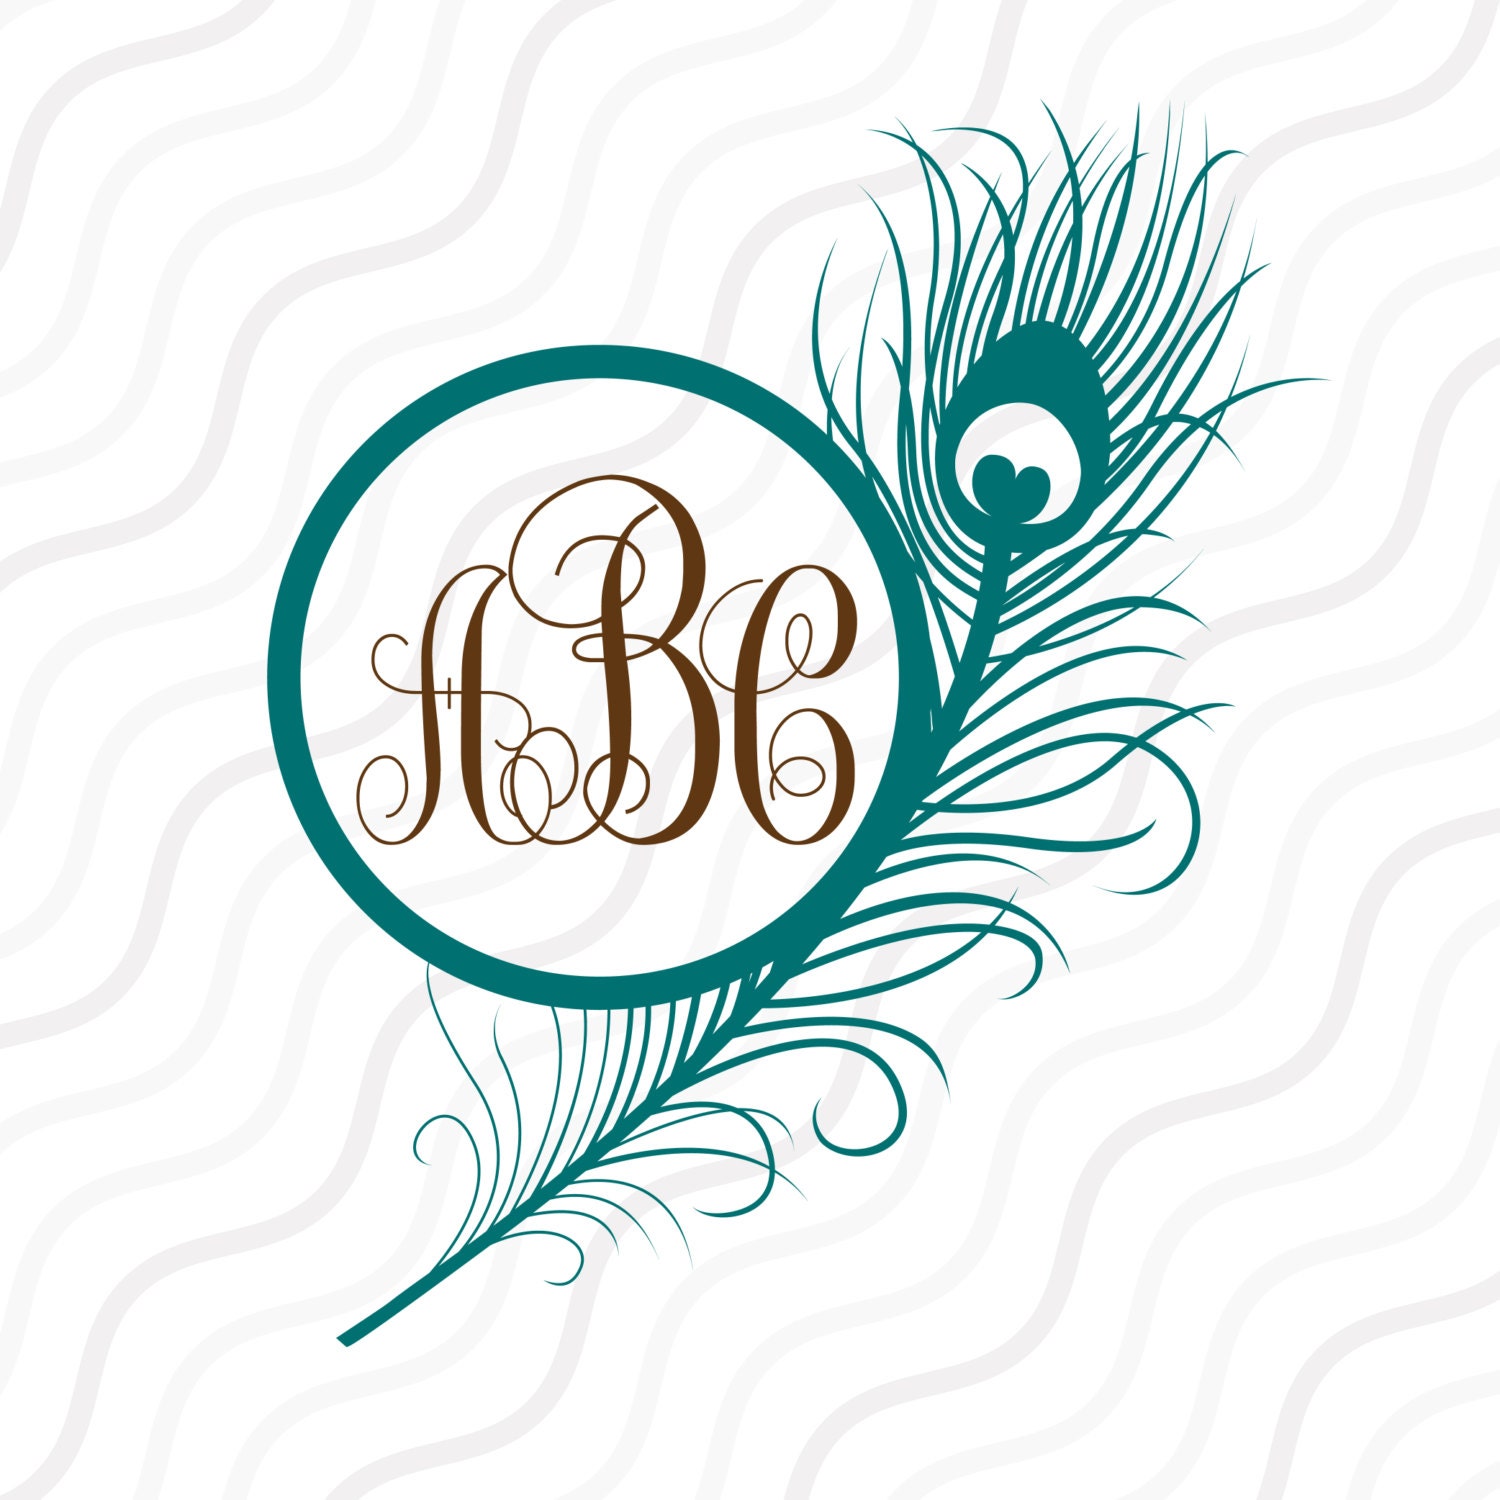 Download Peacock Feather SVG Feather Peacock Feather Monogram SVG Cut